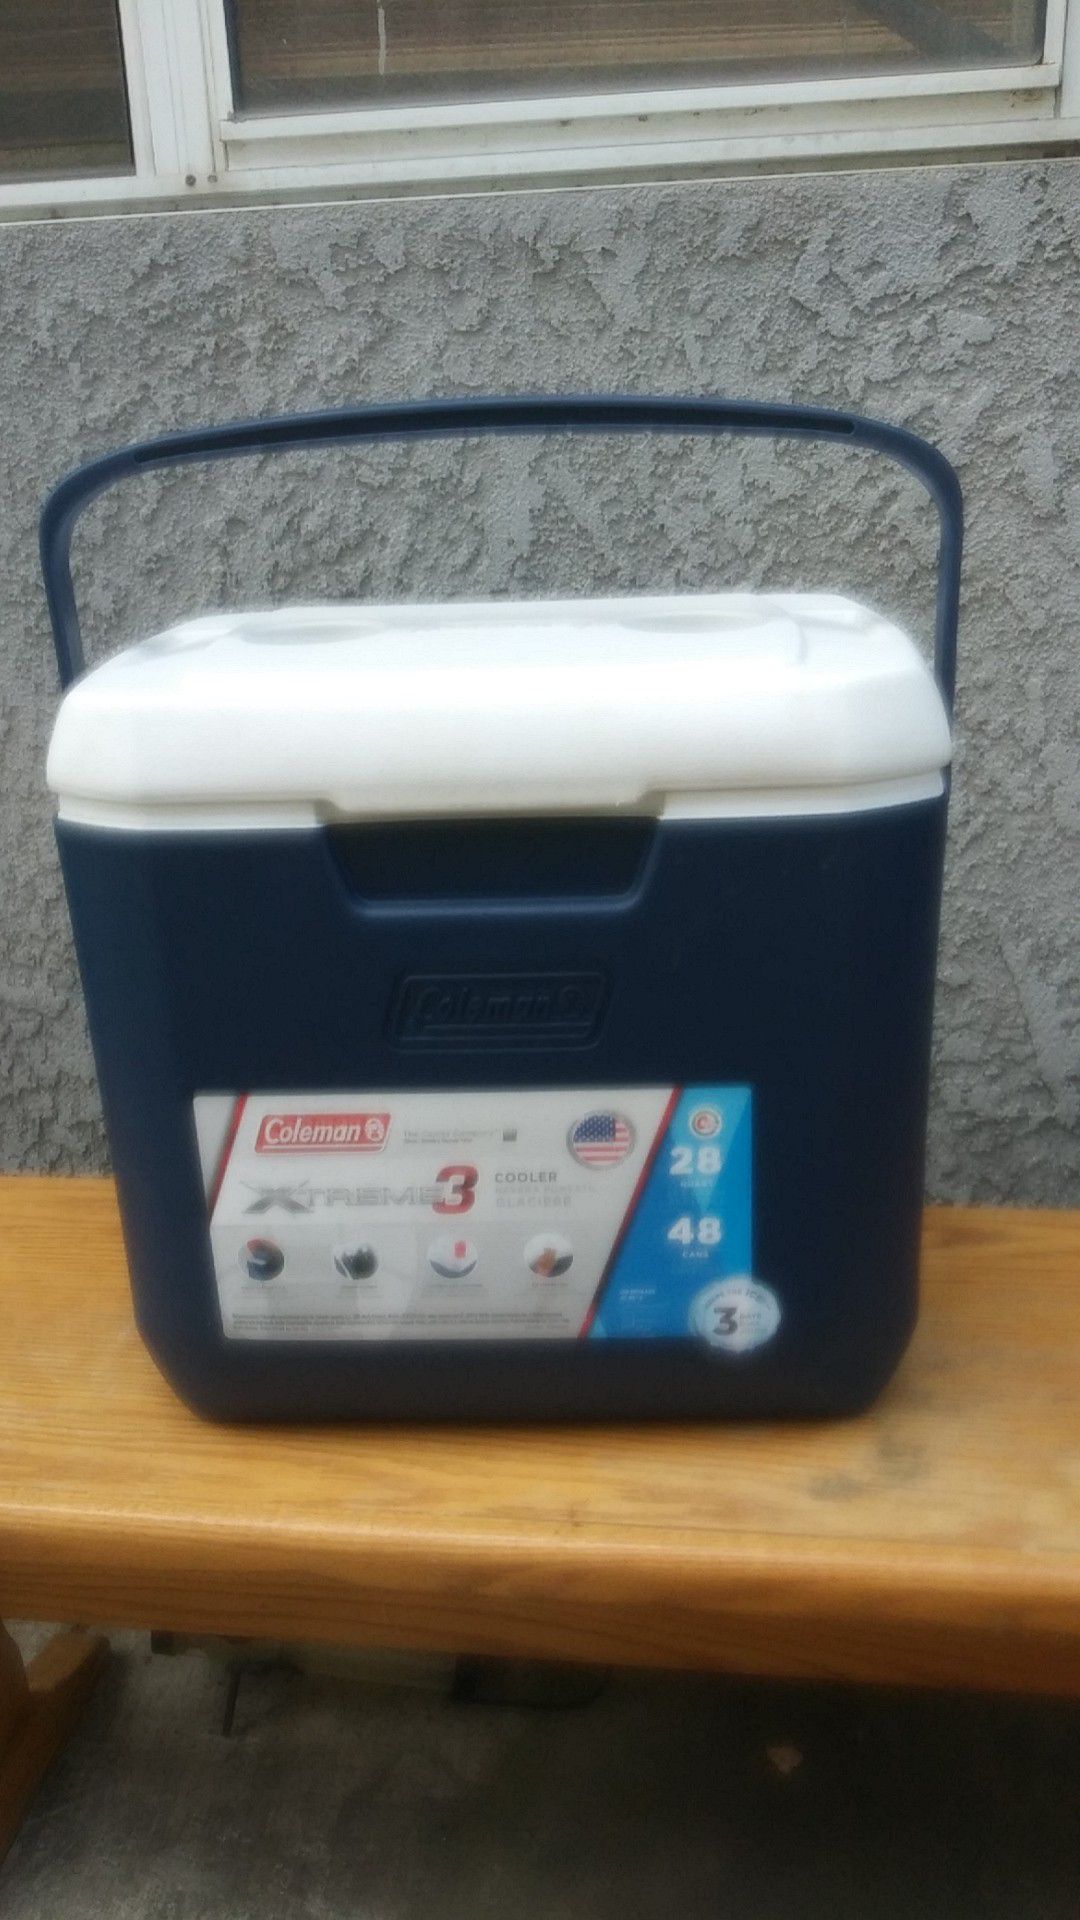 Coleman extreme 3 cooler